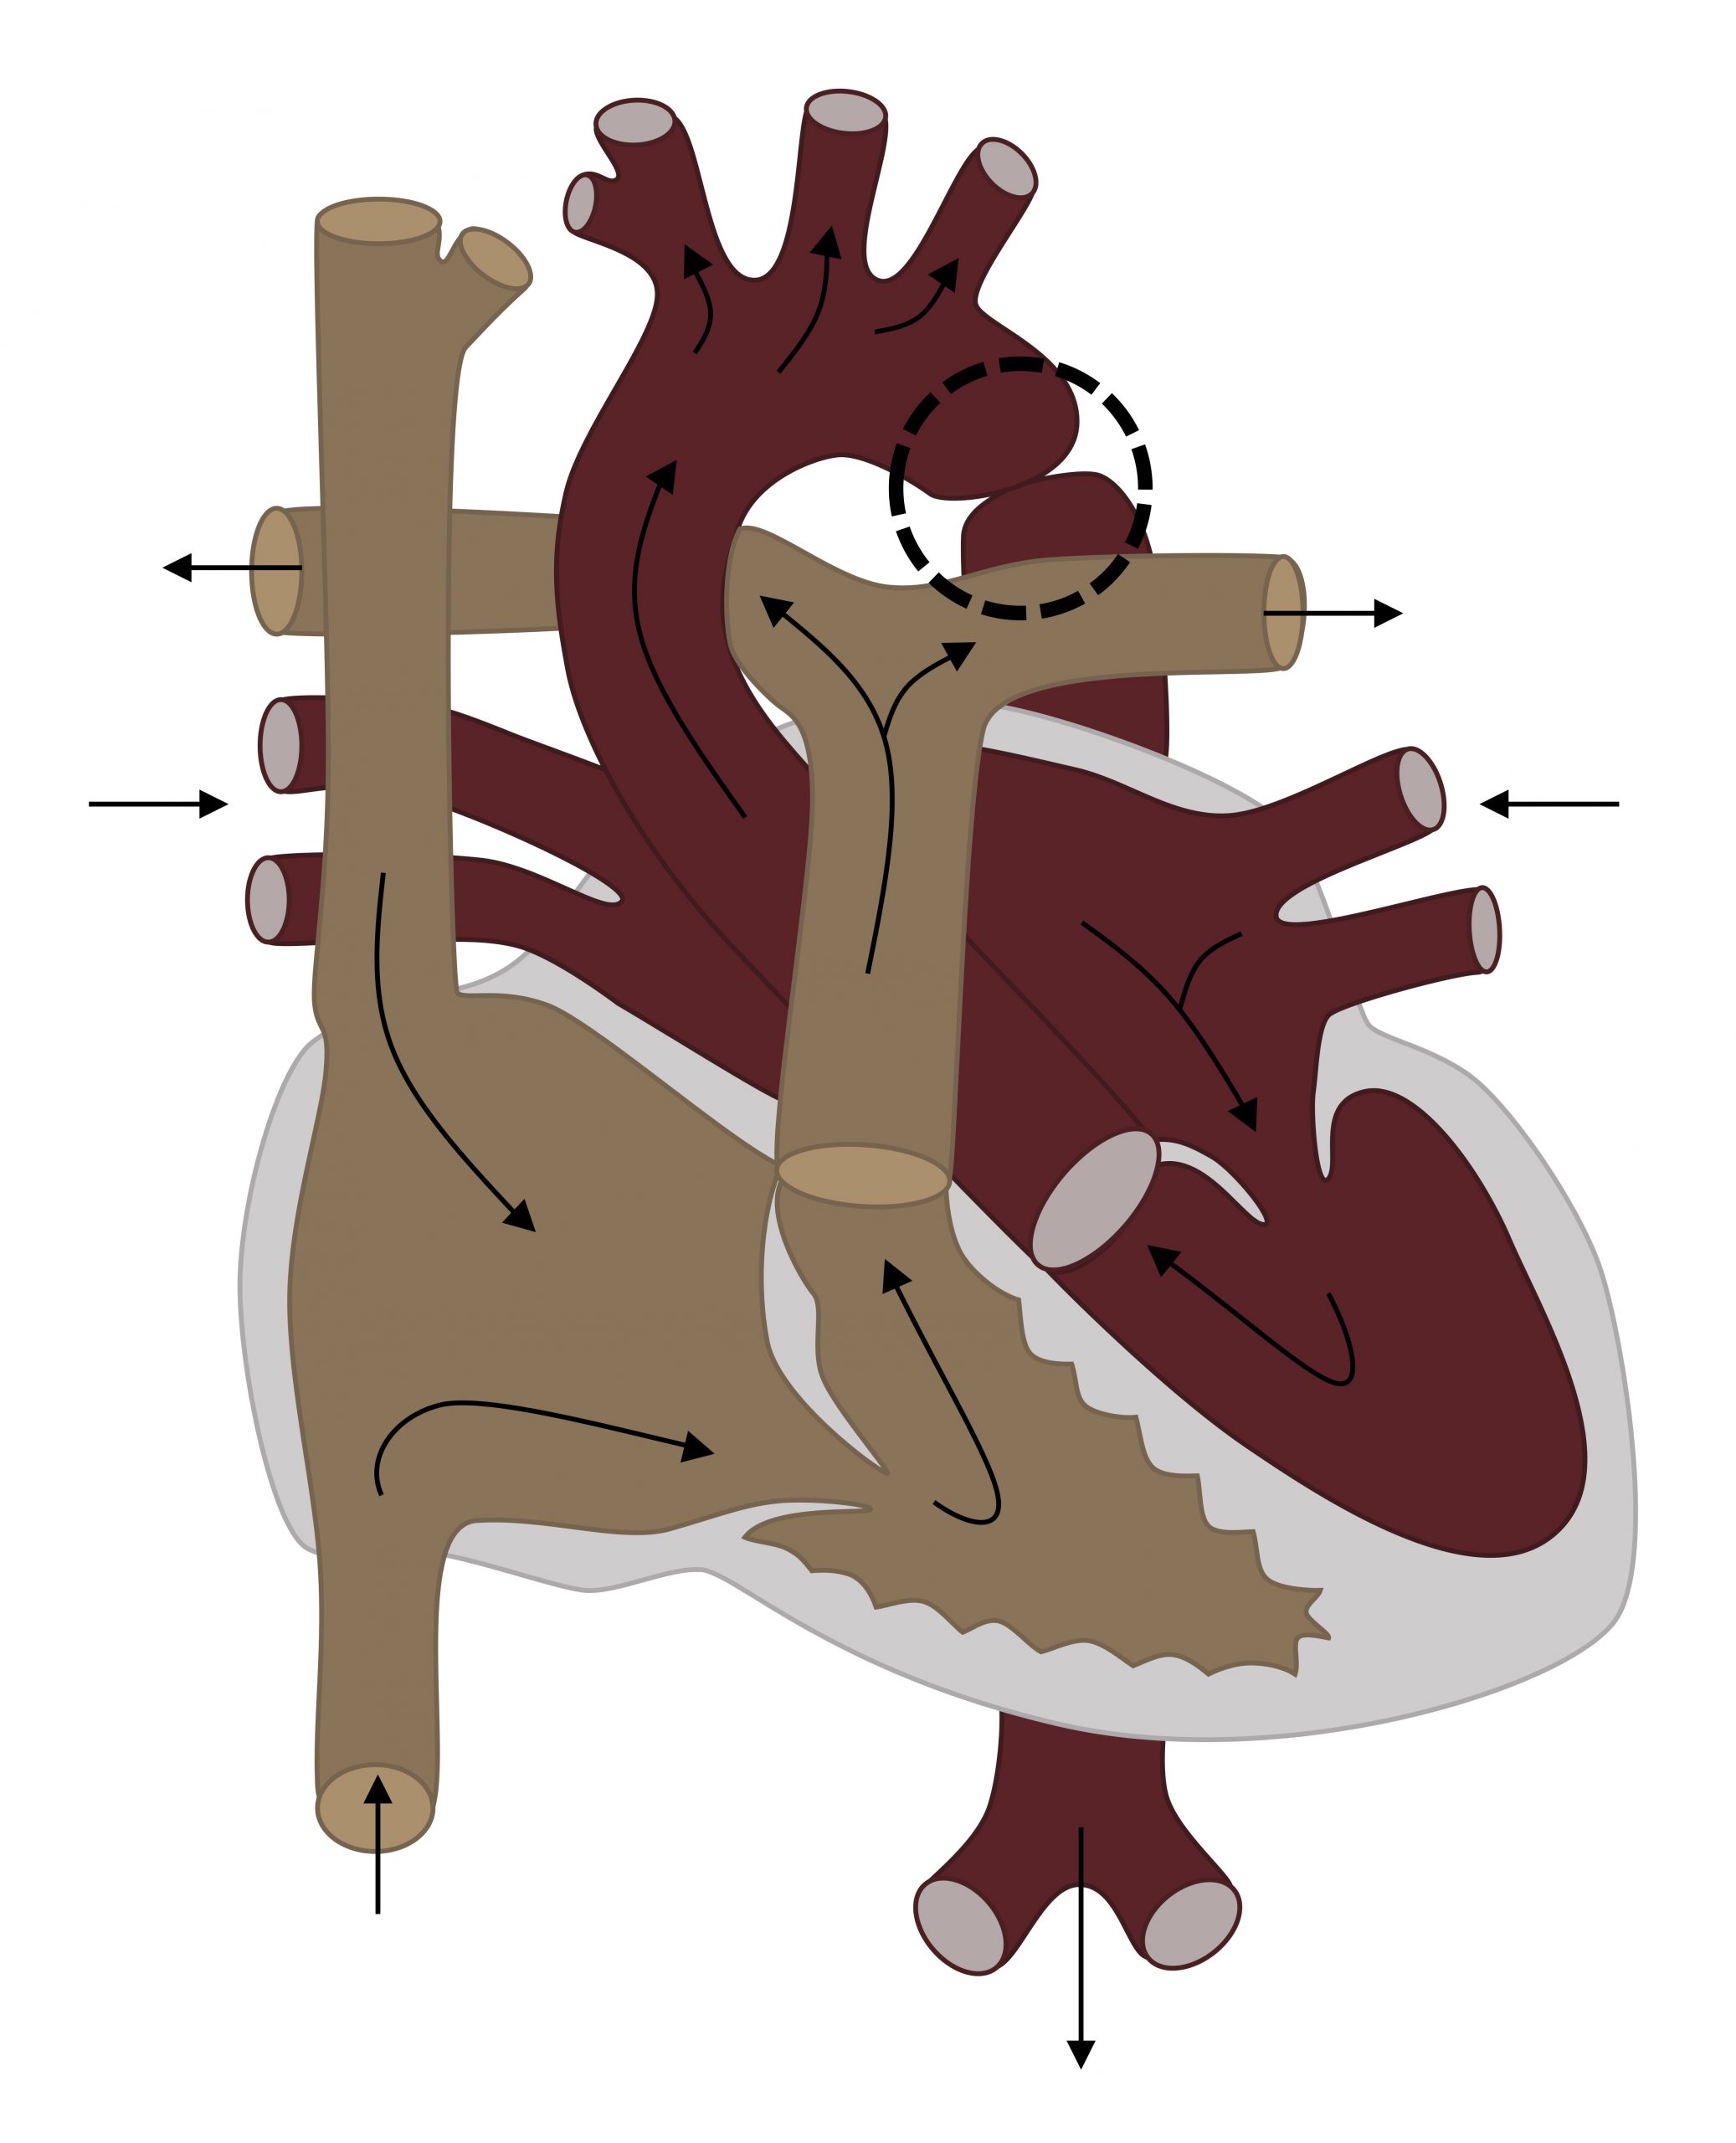 A diagram of the circulatory pathway through the heart shows normal circulatory route until the descending aorta is reached which is 'pinched' signifying a coarctation of the aorta.